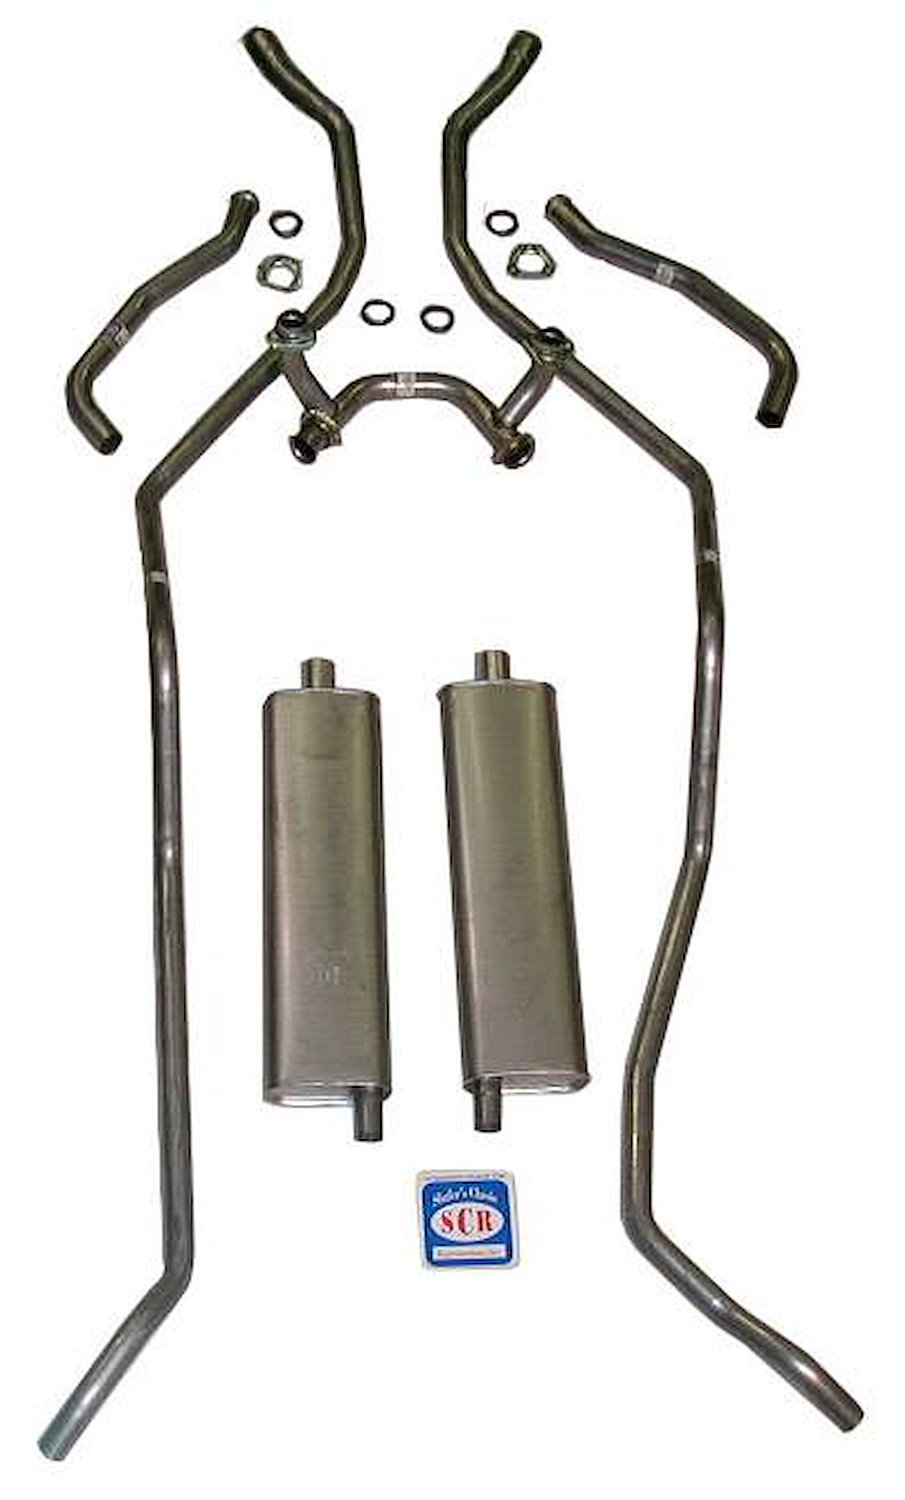 73007S 1958 Chevrolet Full-Size Exhaust System 8-cyl 283 Dual, 304 Stainless Steel